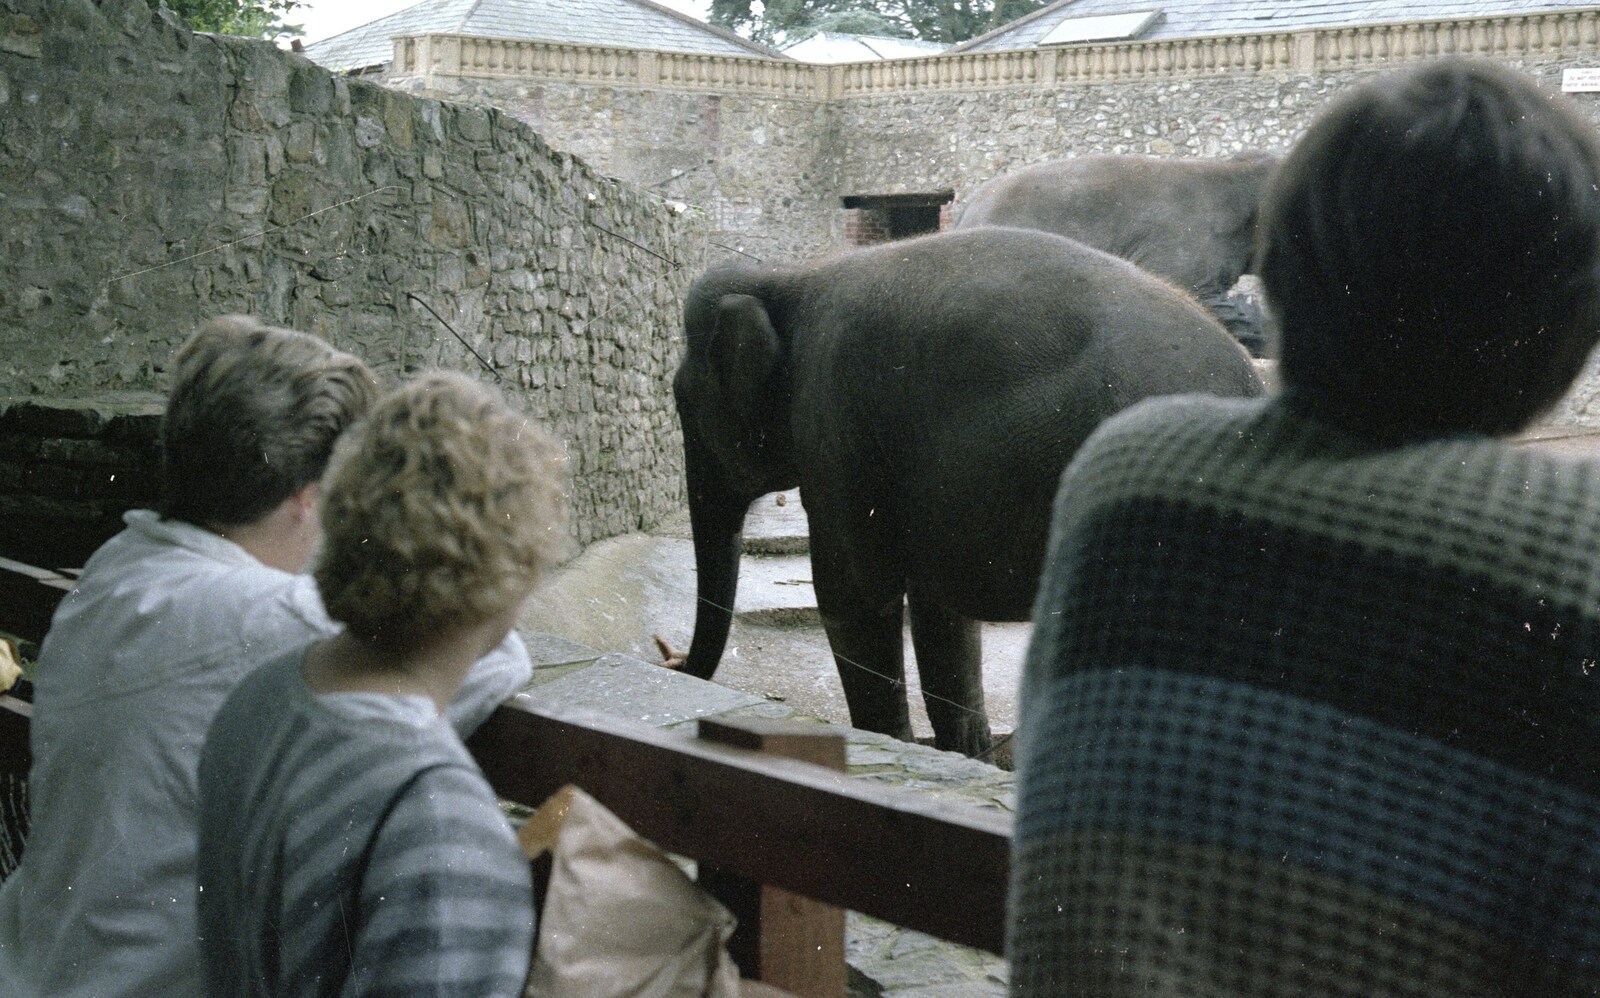 Carol, Anna and Phil look at elephants from Brockenhurst College Exams and Miscellany, Barton on Sea, Hampshire - 10th June 1985